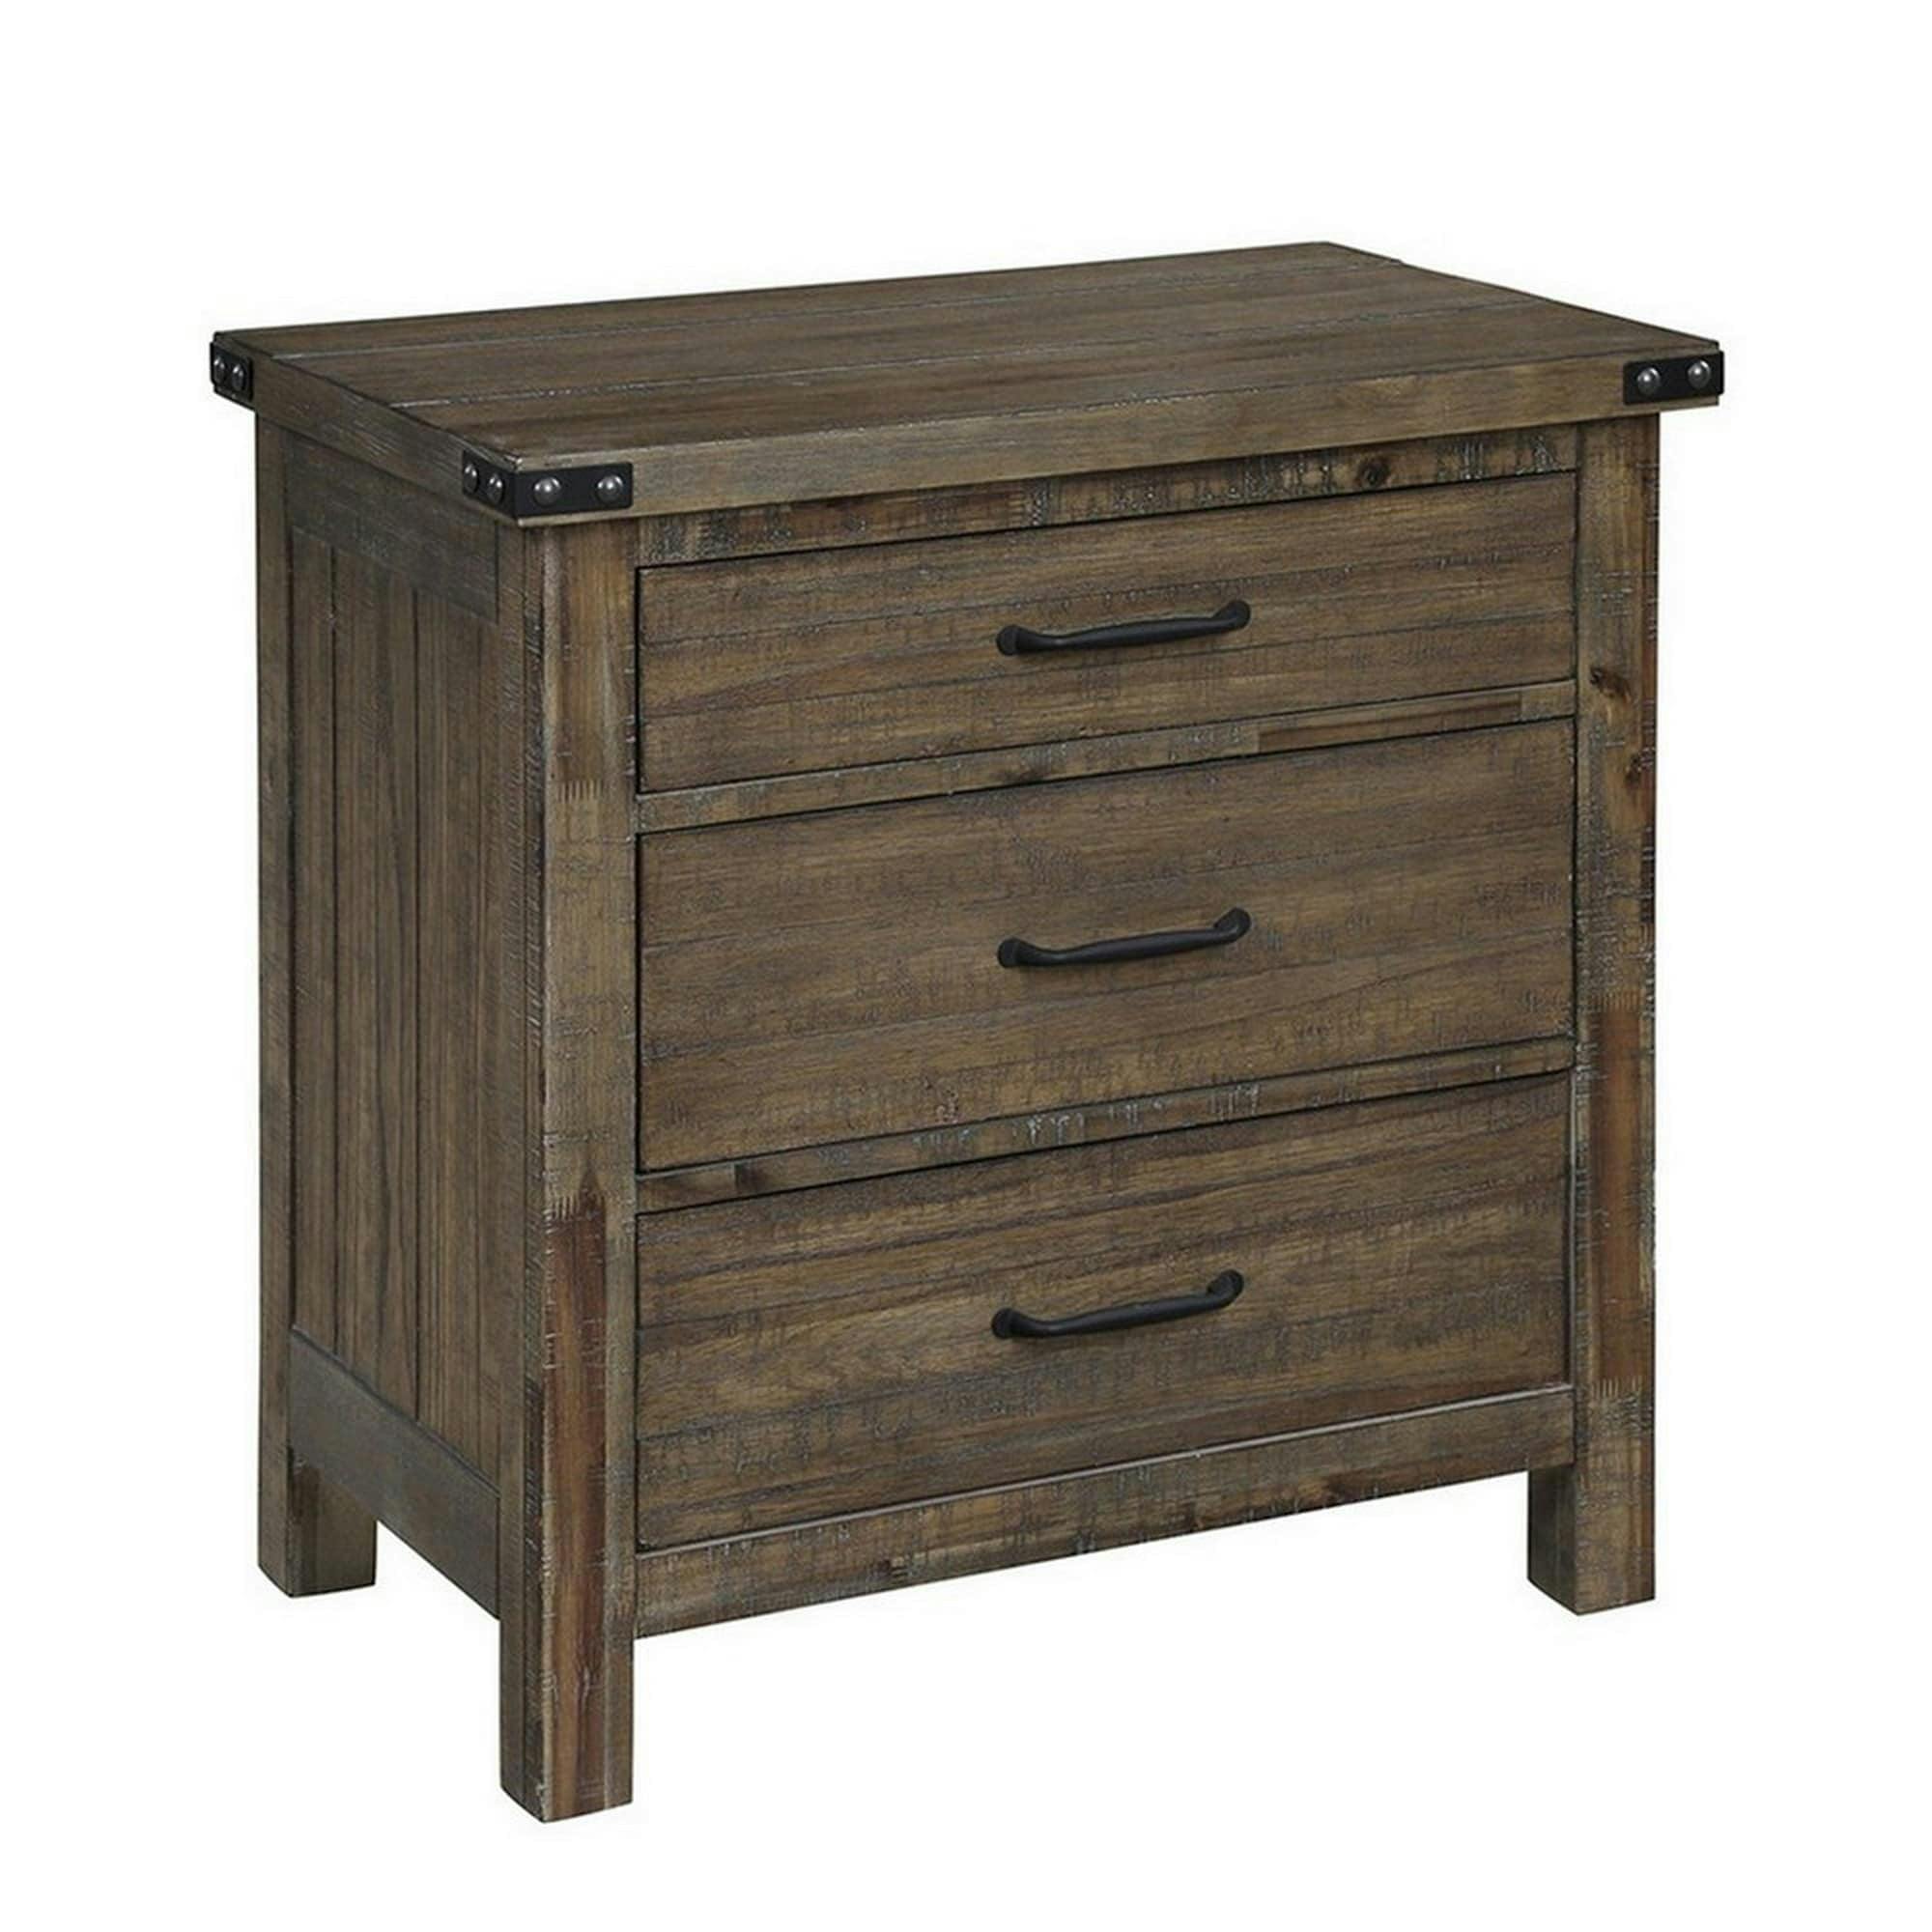 Farmhouse Rustic Solid Wood & Veneer Nightstand with Metal Accents, Brown